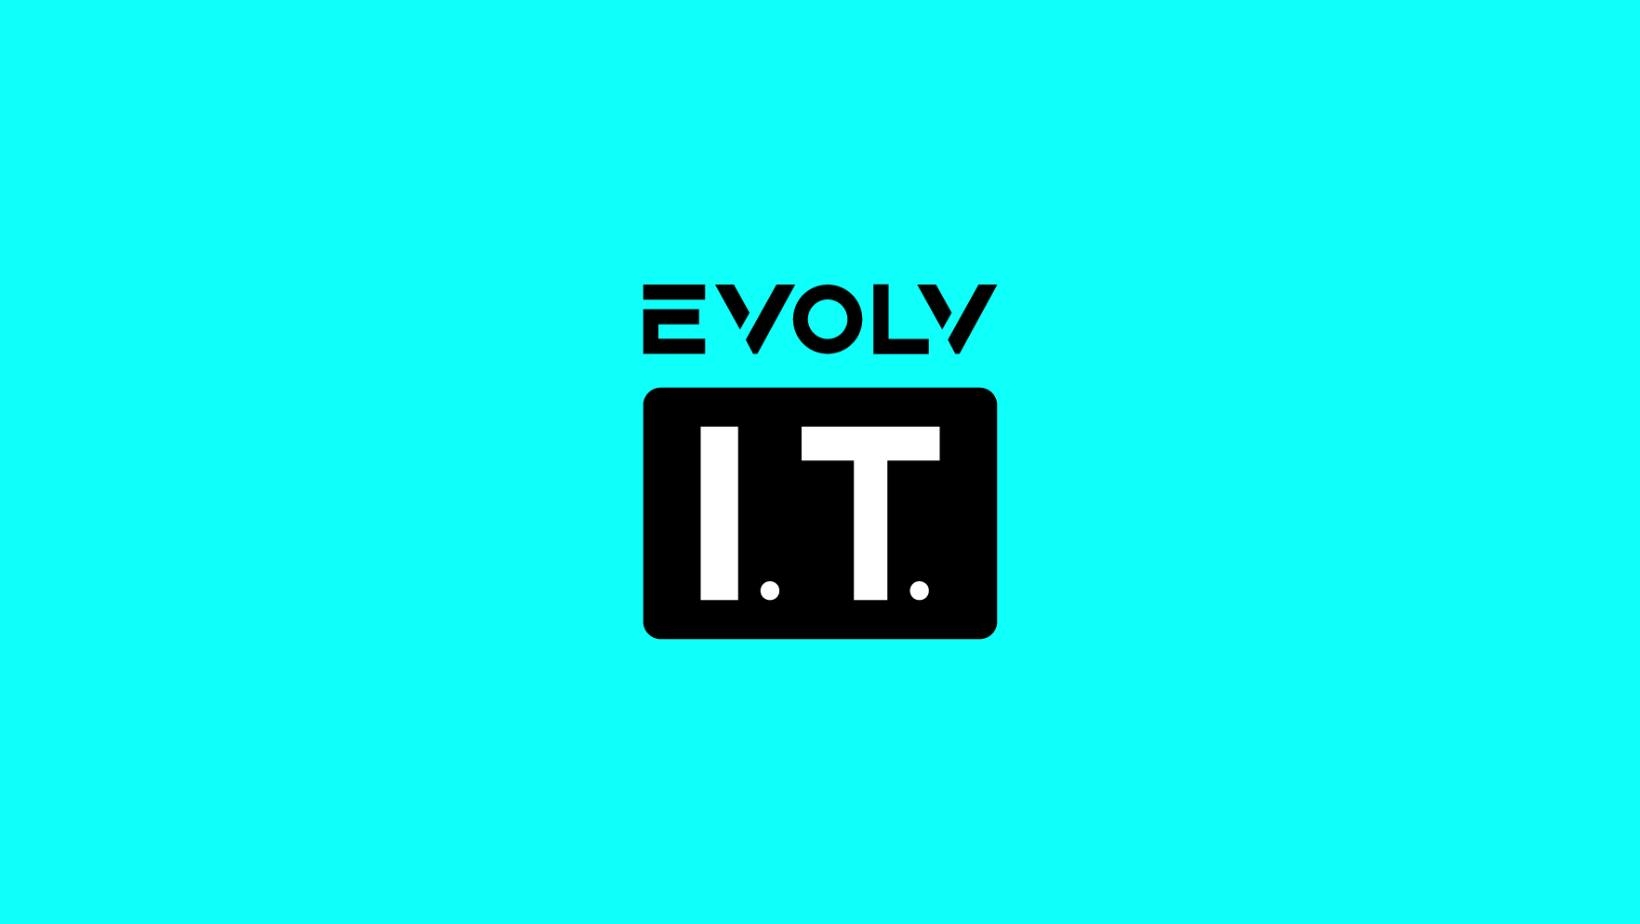 Business > Information Technology (IT) webinar by Evolv I.T. for Security and Productivity Webinar | HOW TO STOP WASTING YOUR BUDGET ON I.T.